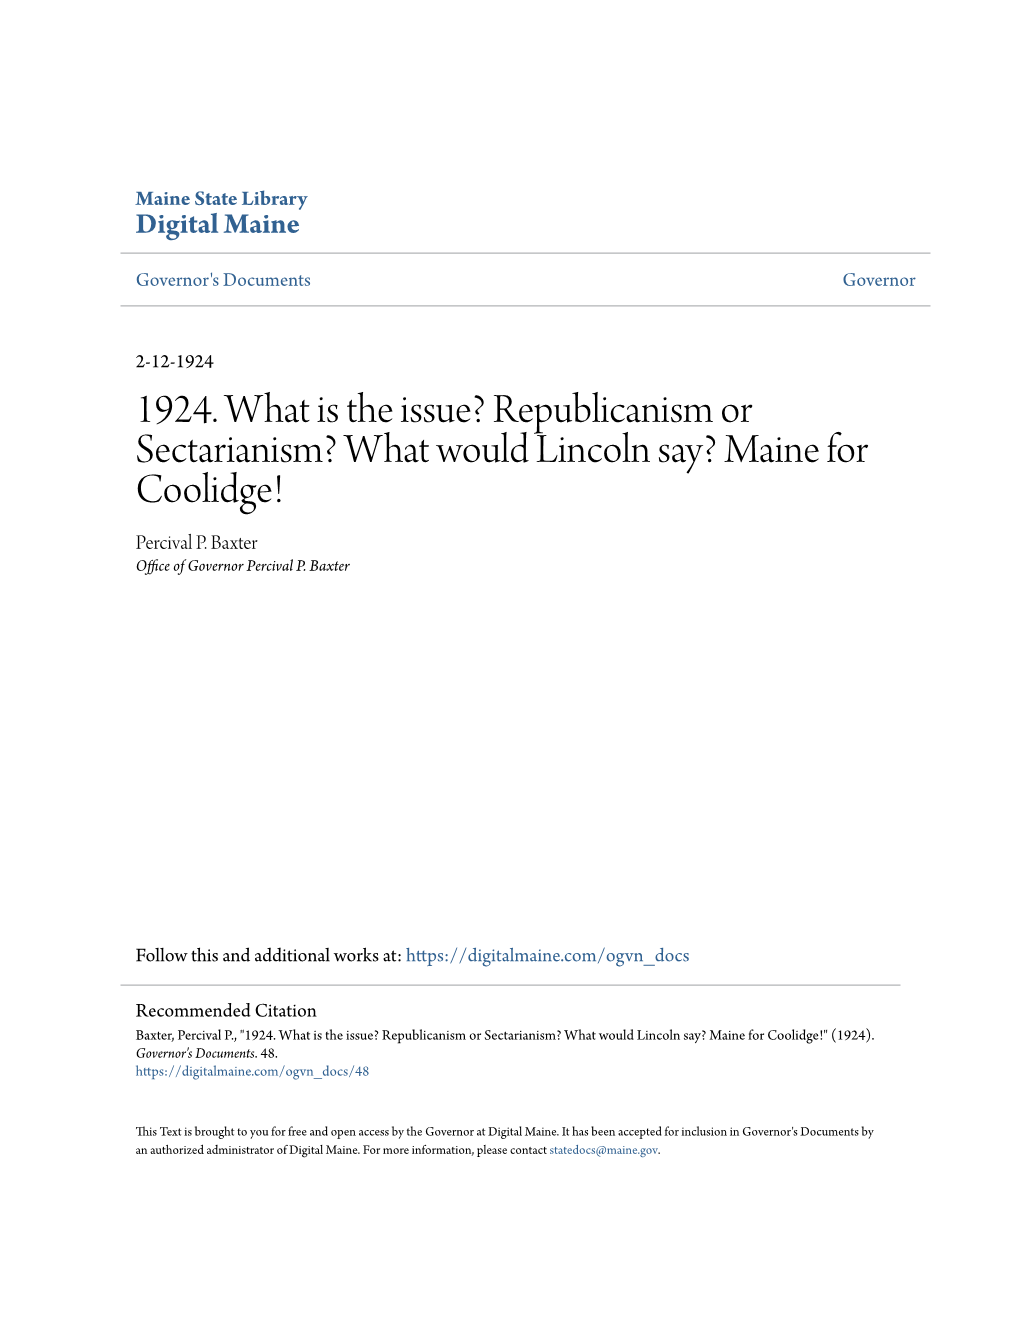 1924. What Is the Issue? Republicanism Or Sectarianism? What Would Lincoln Say? Maine for Coolidge! Percival P